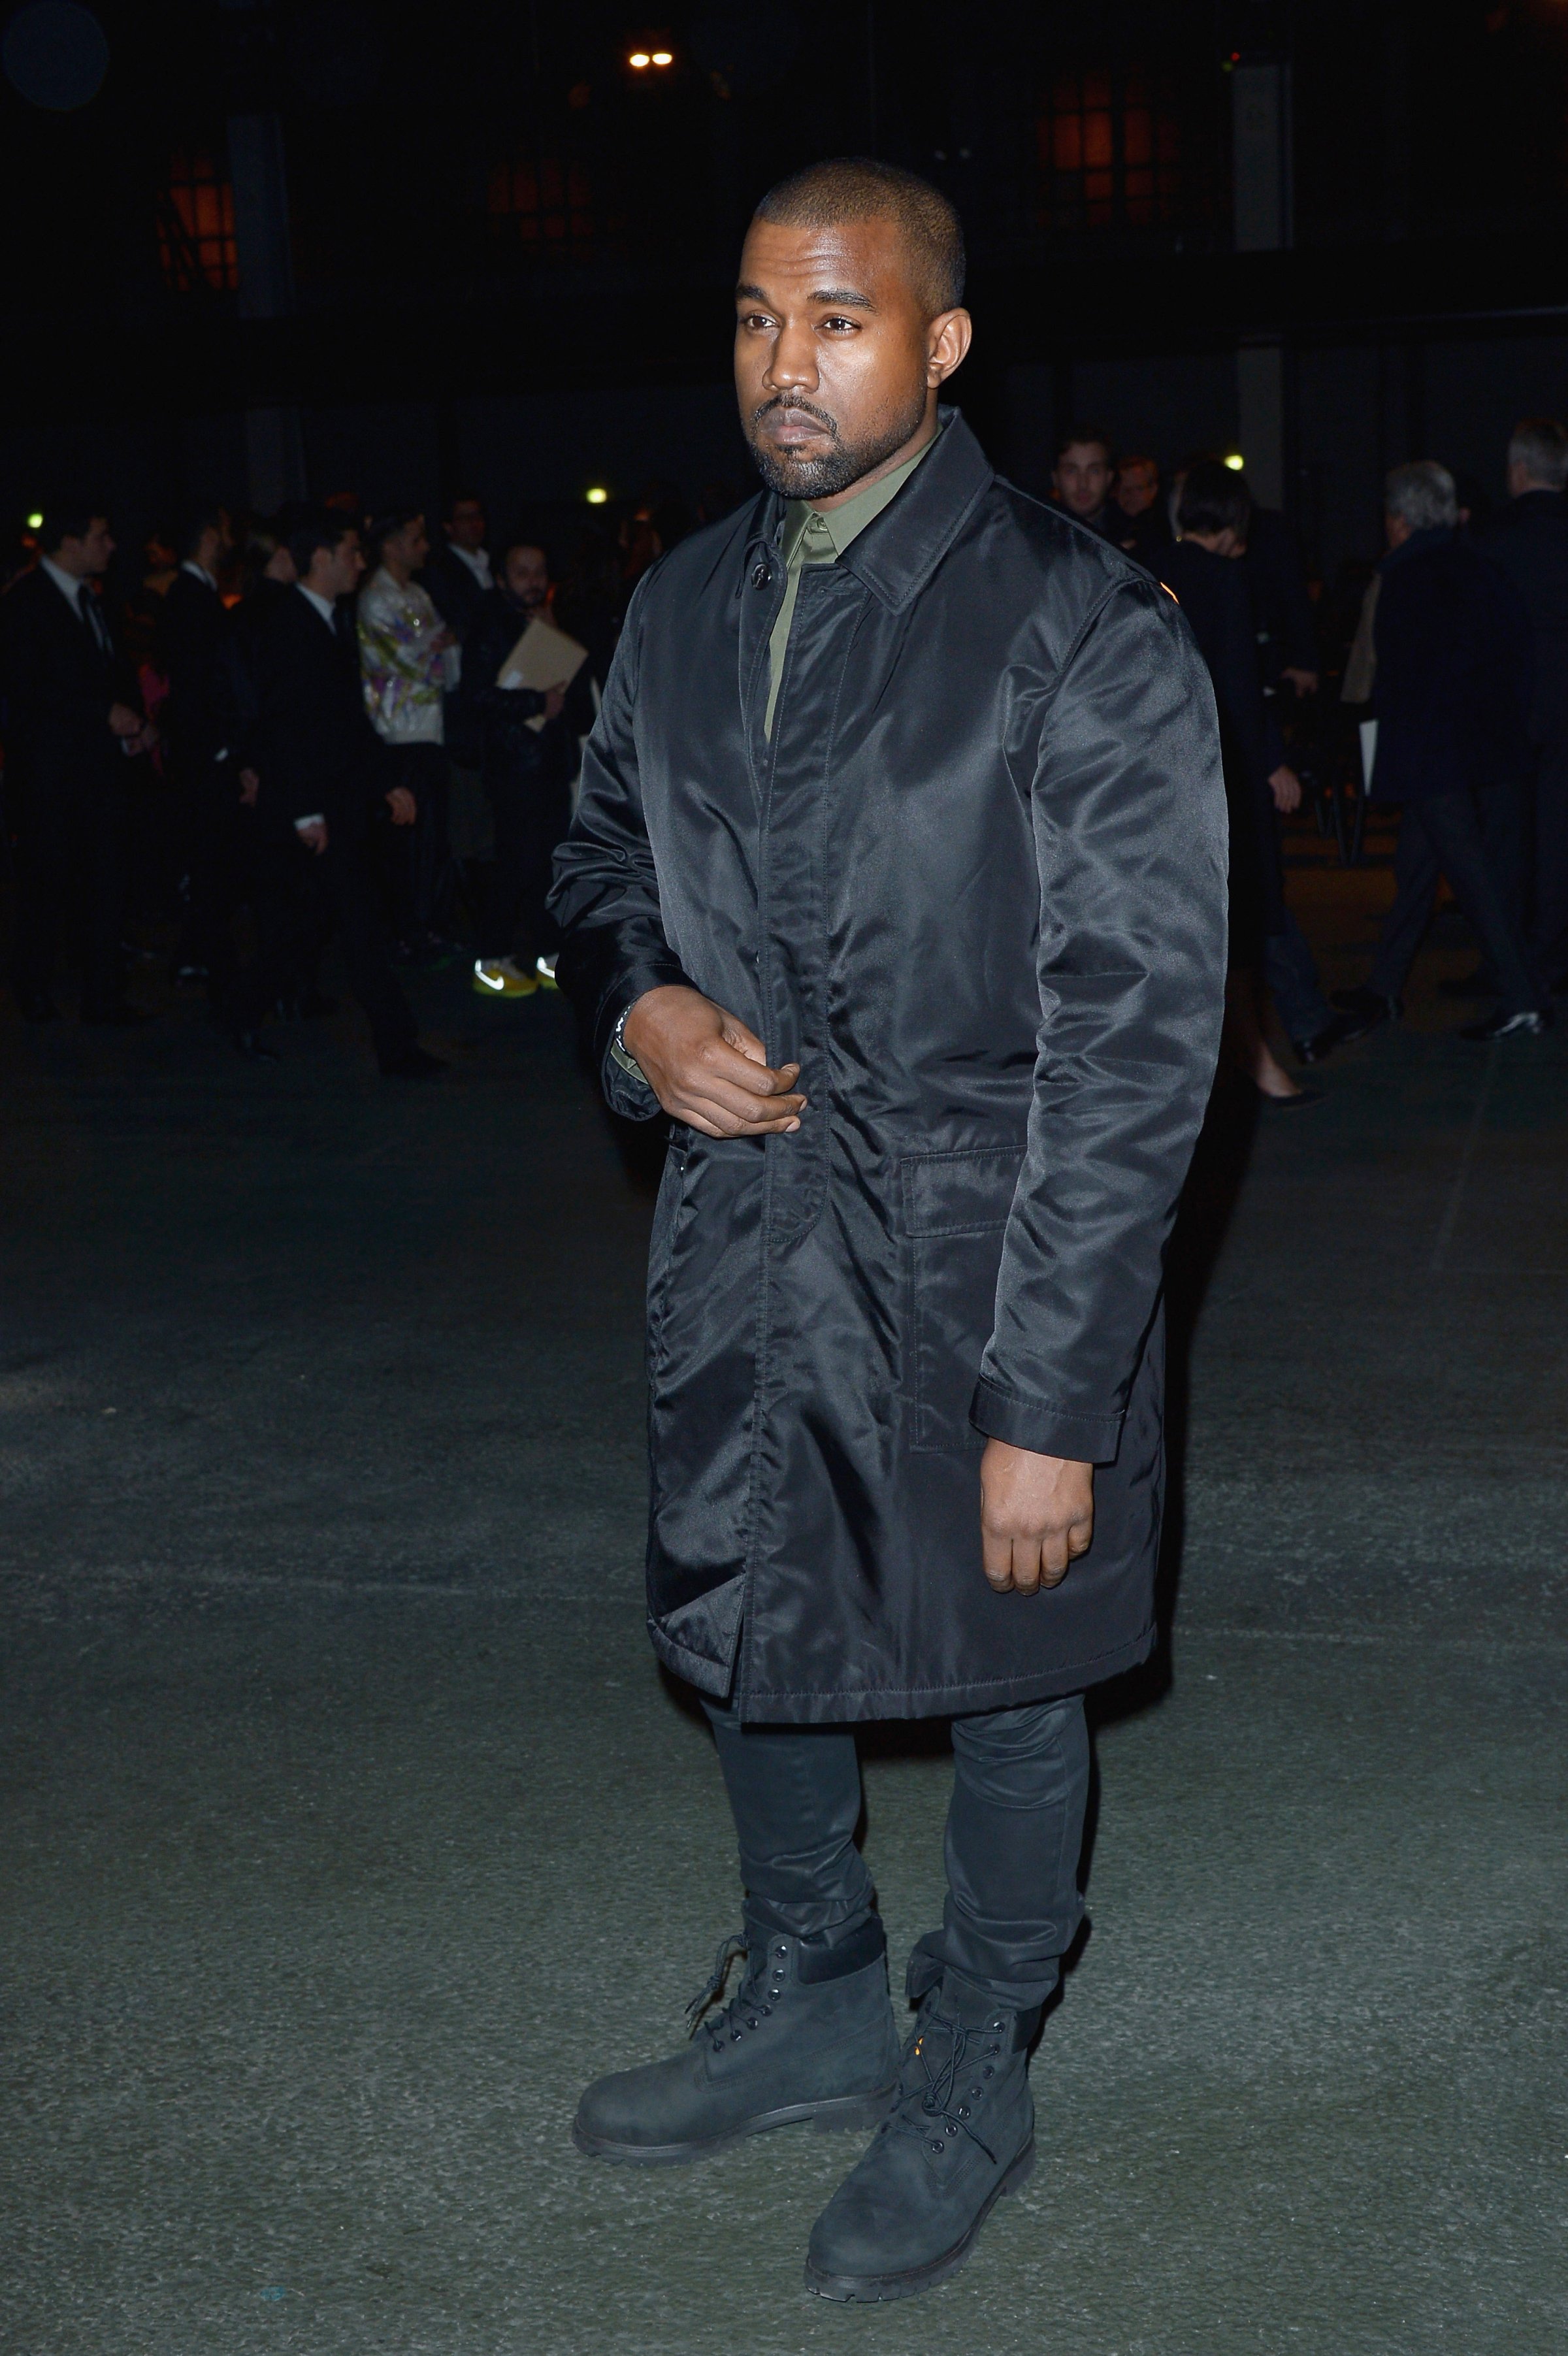 Kanye West attends the Givenchy during Paris Fashion Week Womenswear Fall/Winter 2014-2015 on March 2, 2014 in Paris.